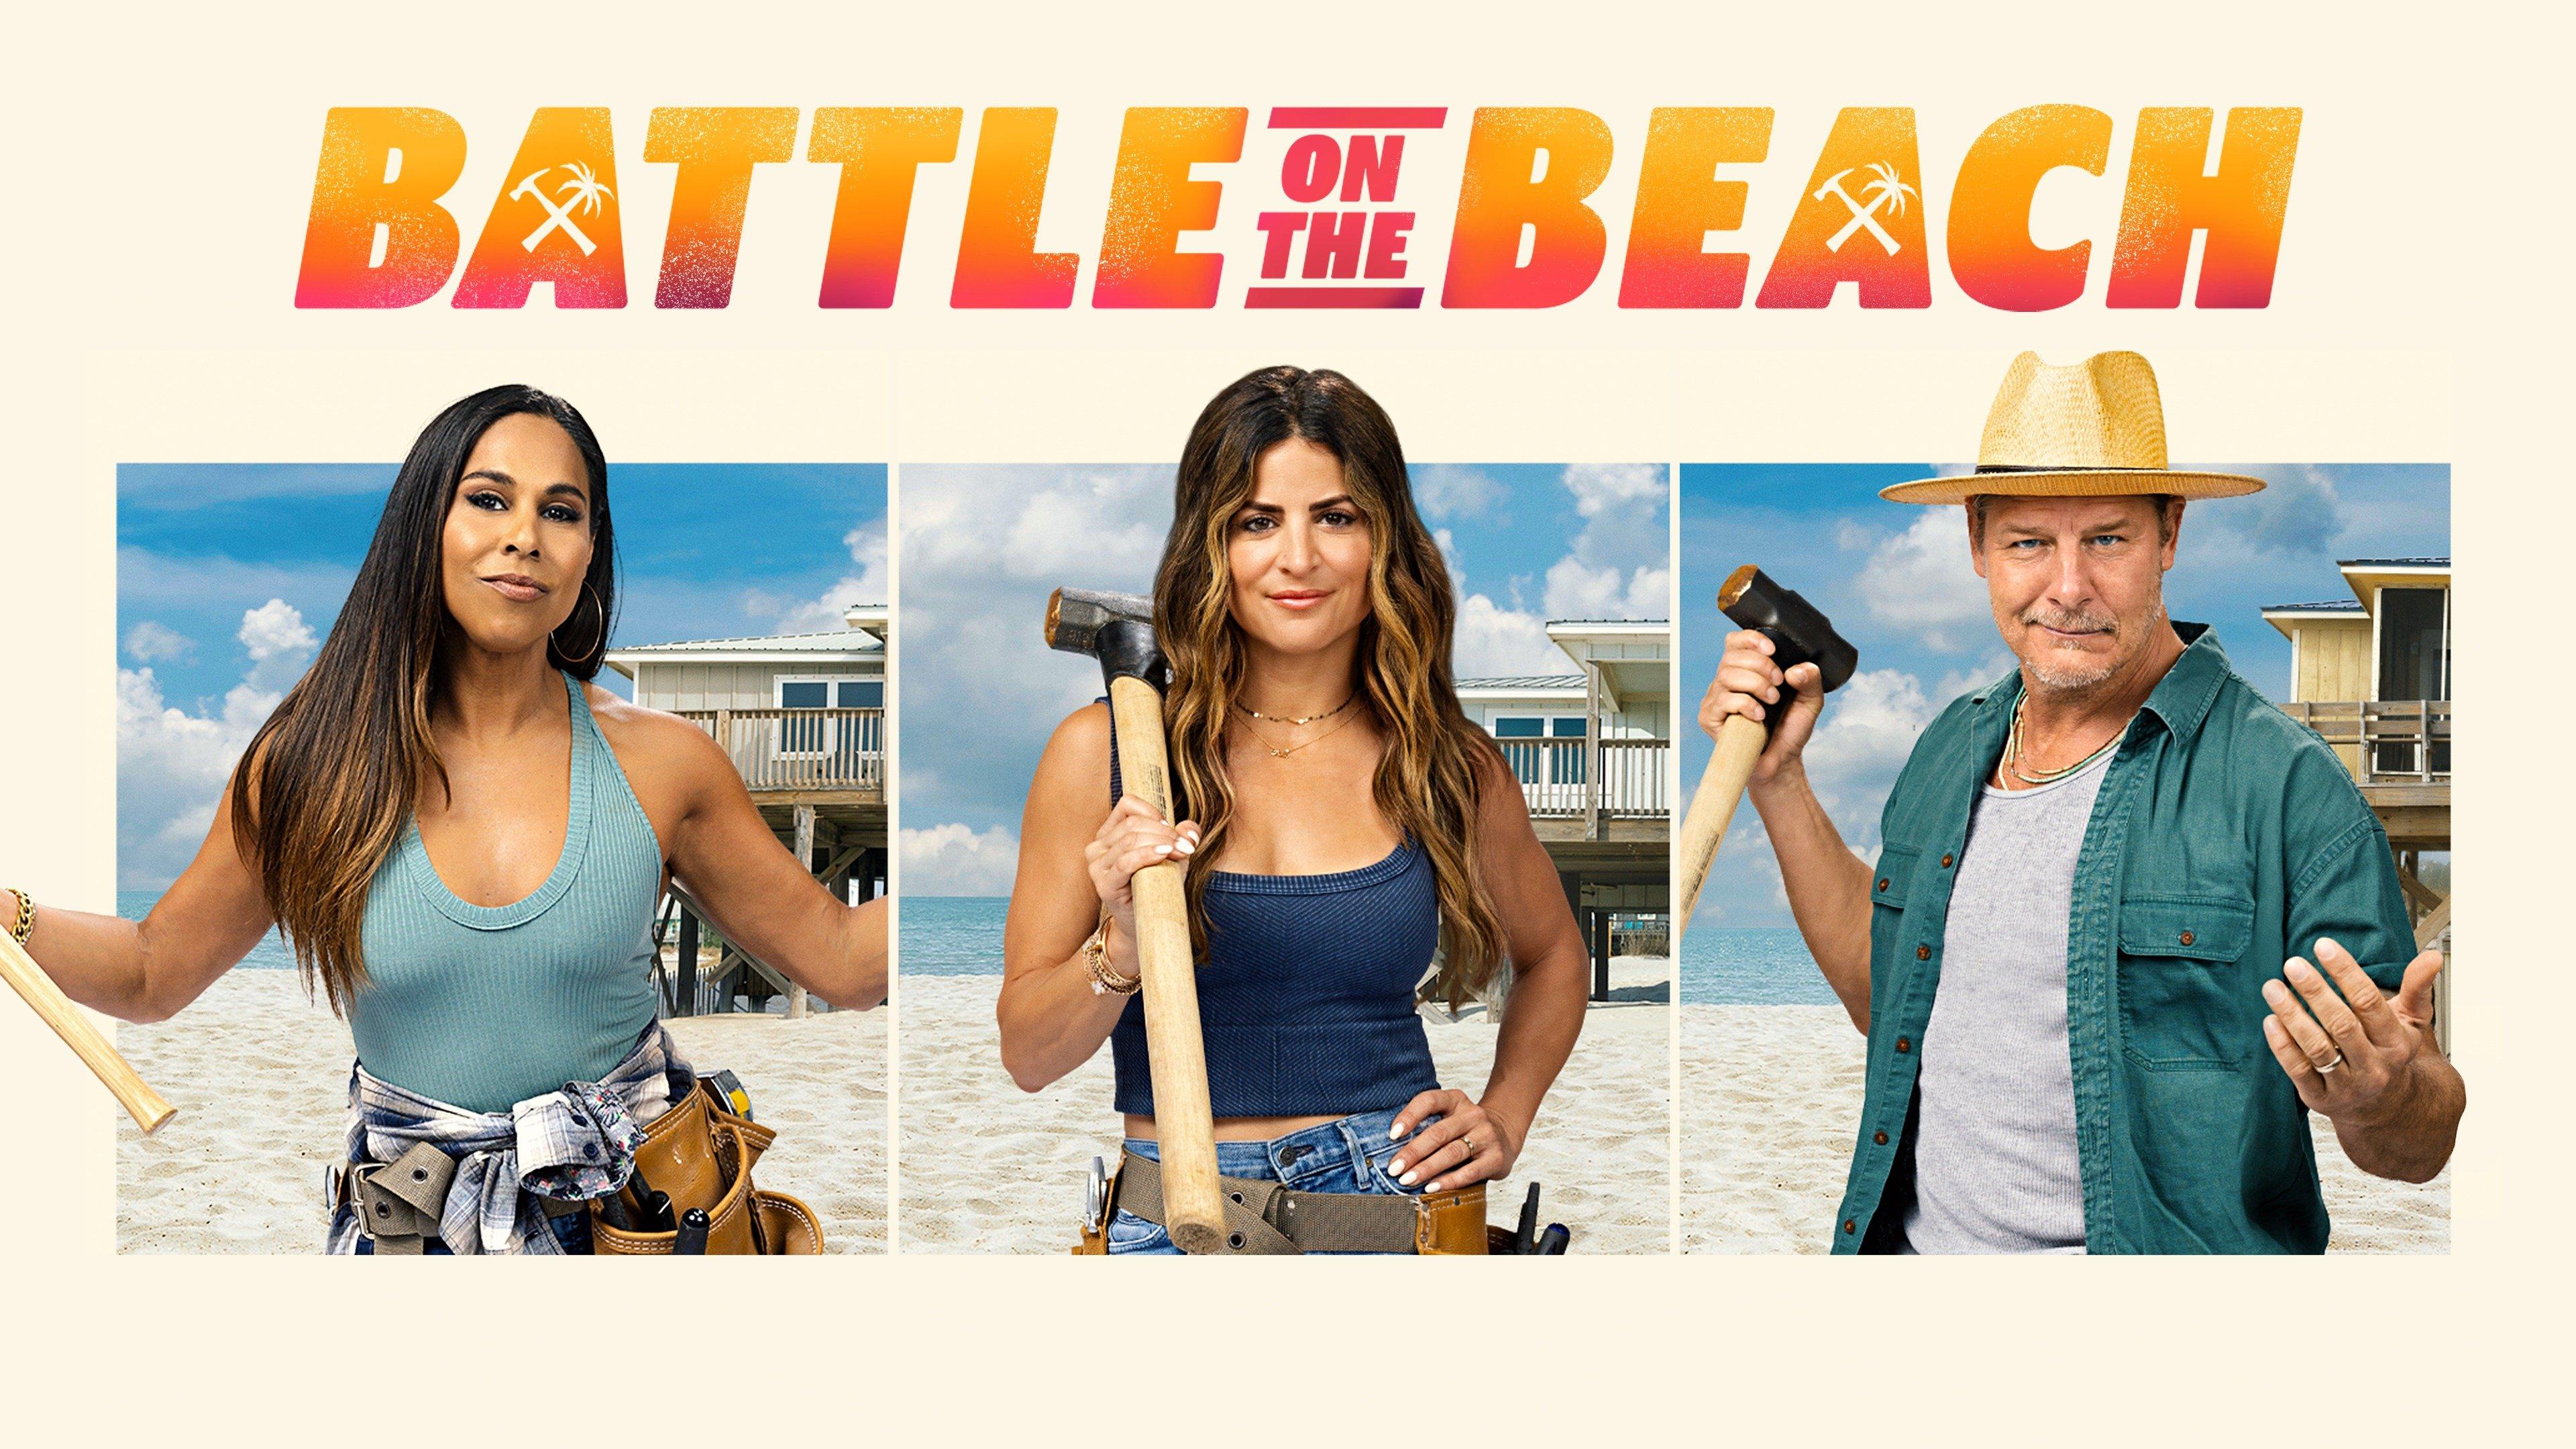 Watch Battle on the Beach Streaming Online on Philo (Free Trial)